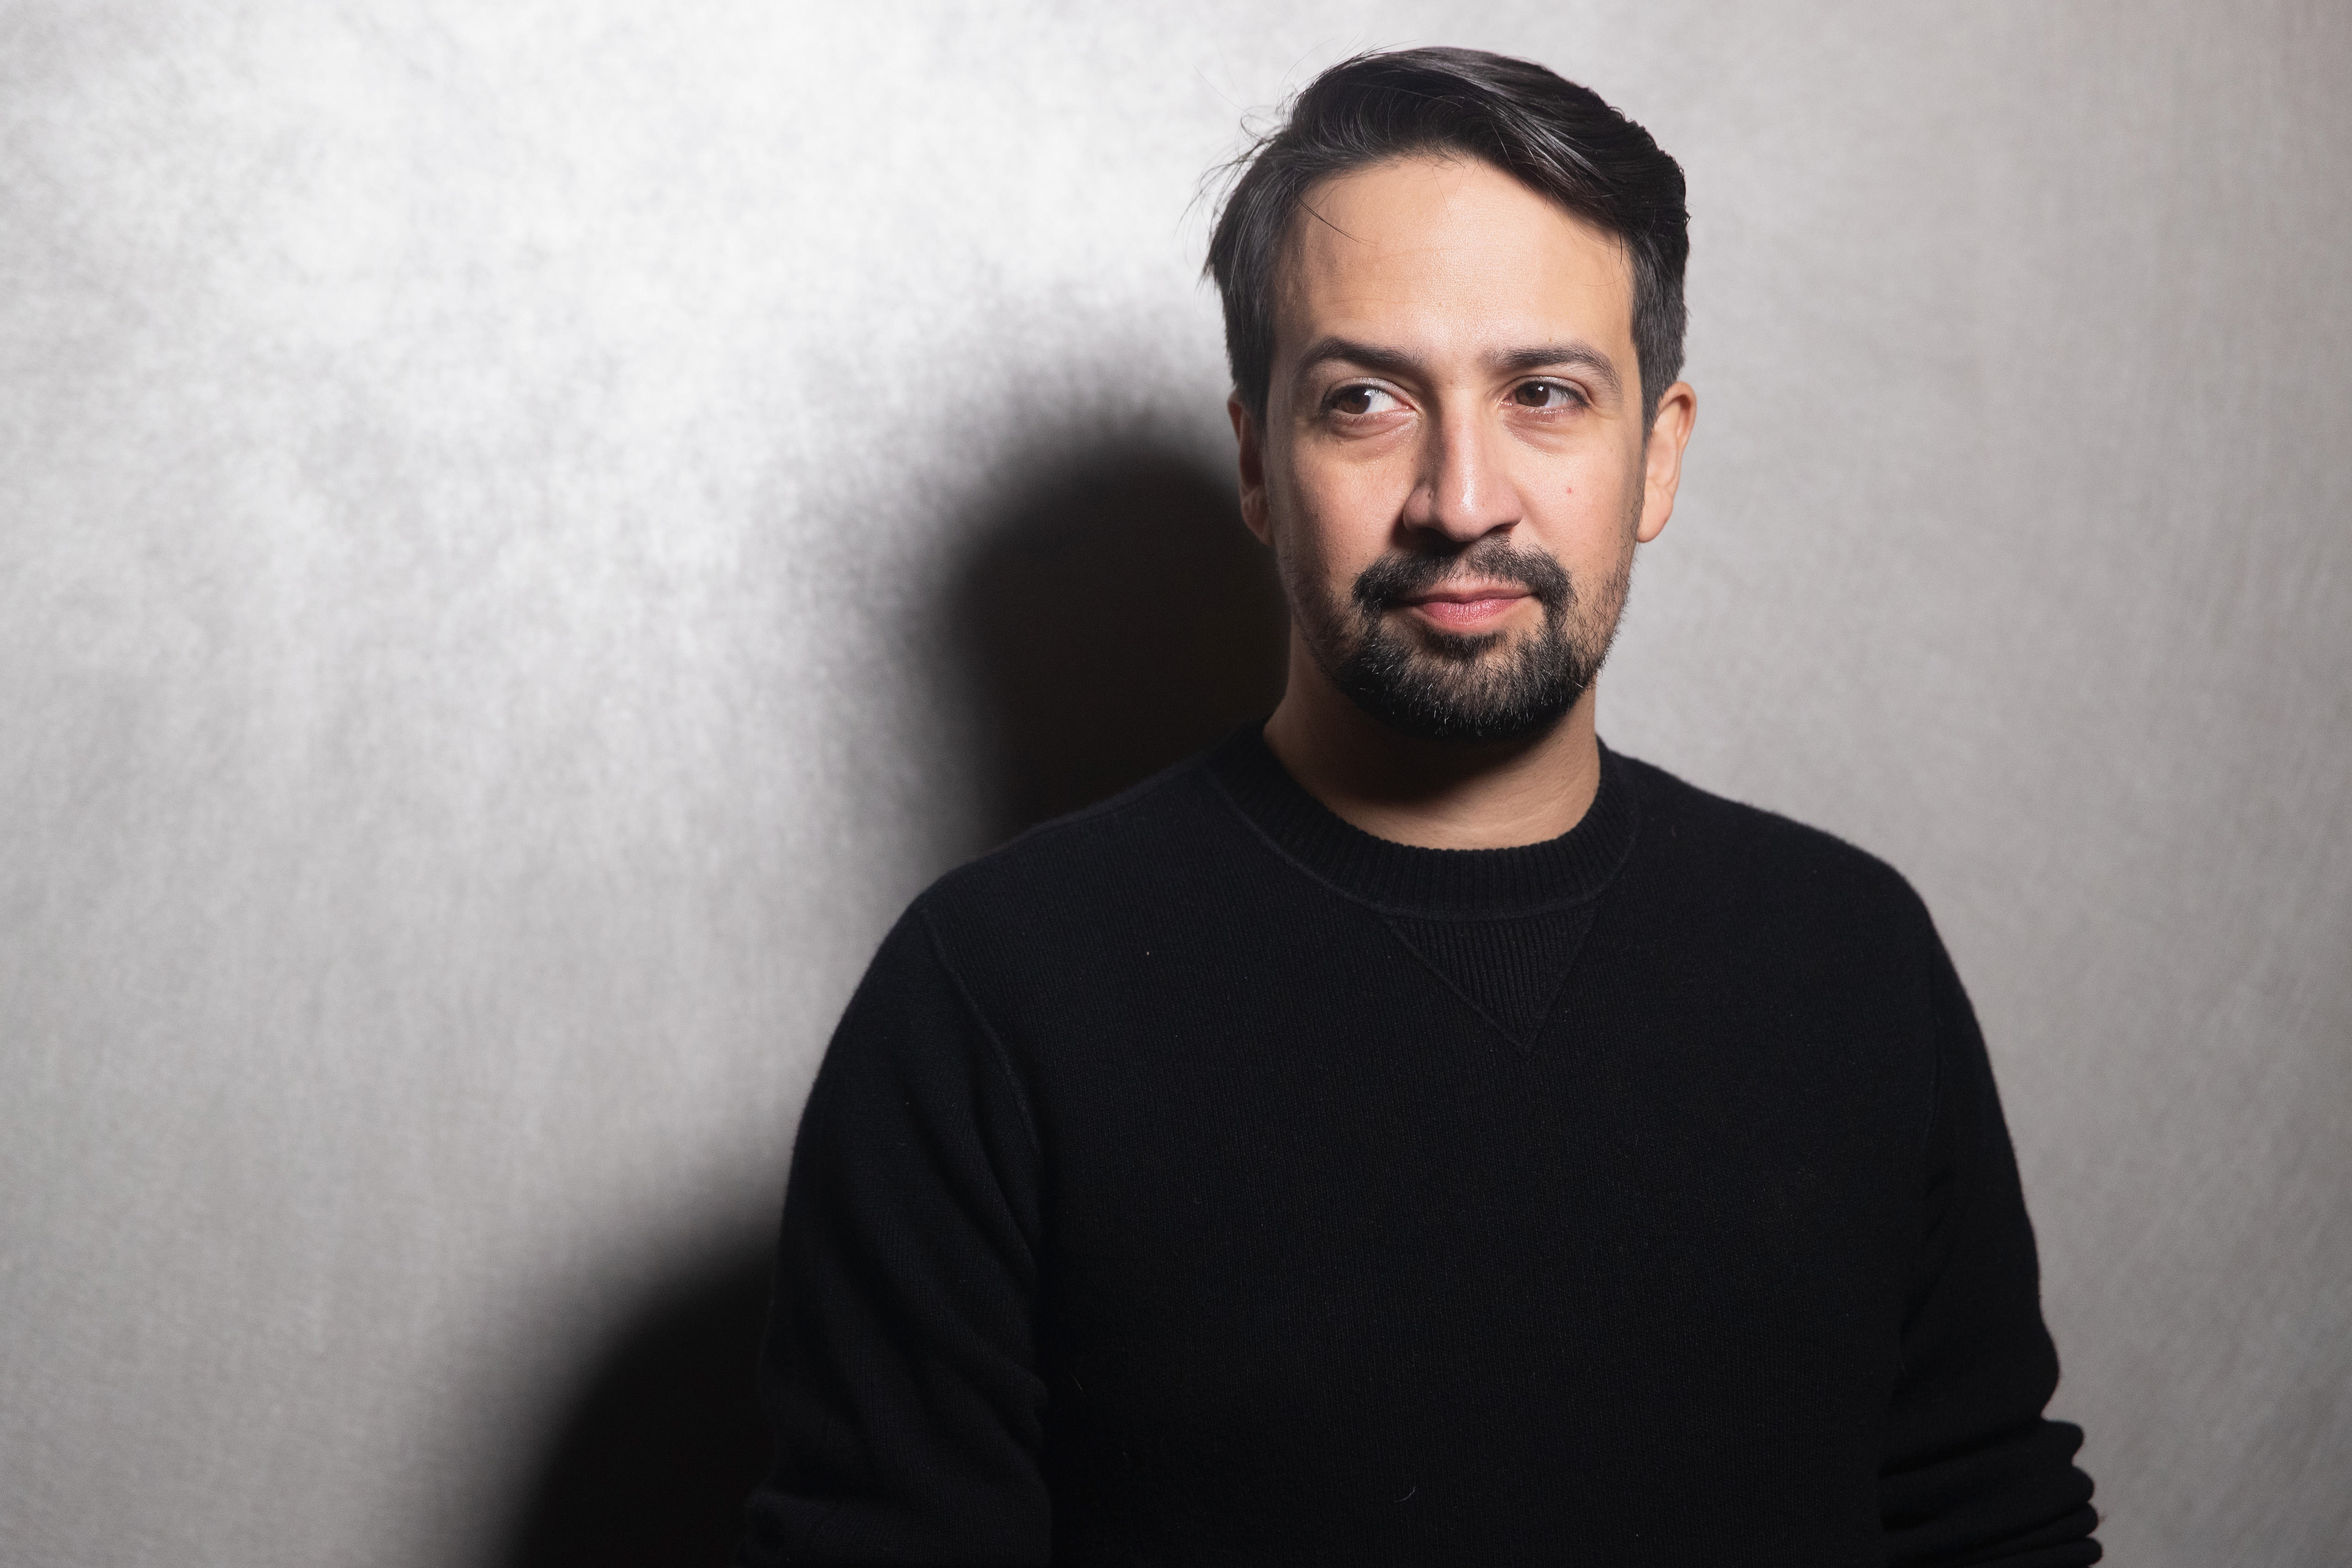 Lin-Manuel Miranda Apologizes For Perceived Colorism In 'In The